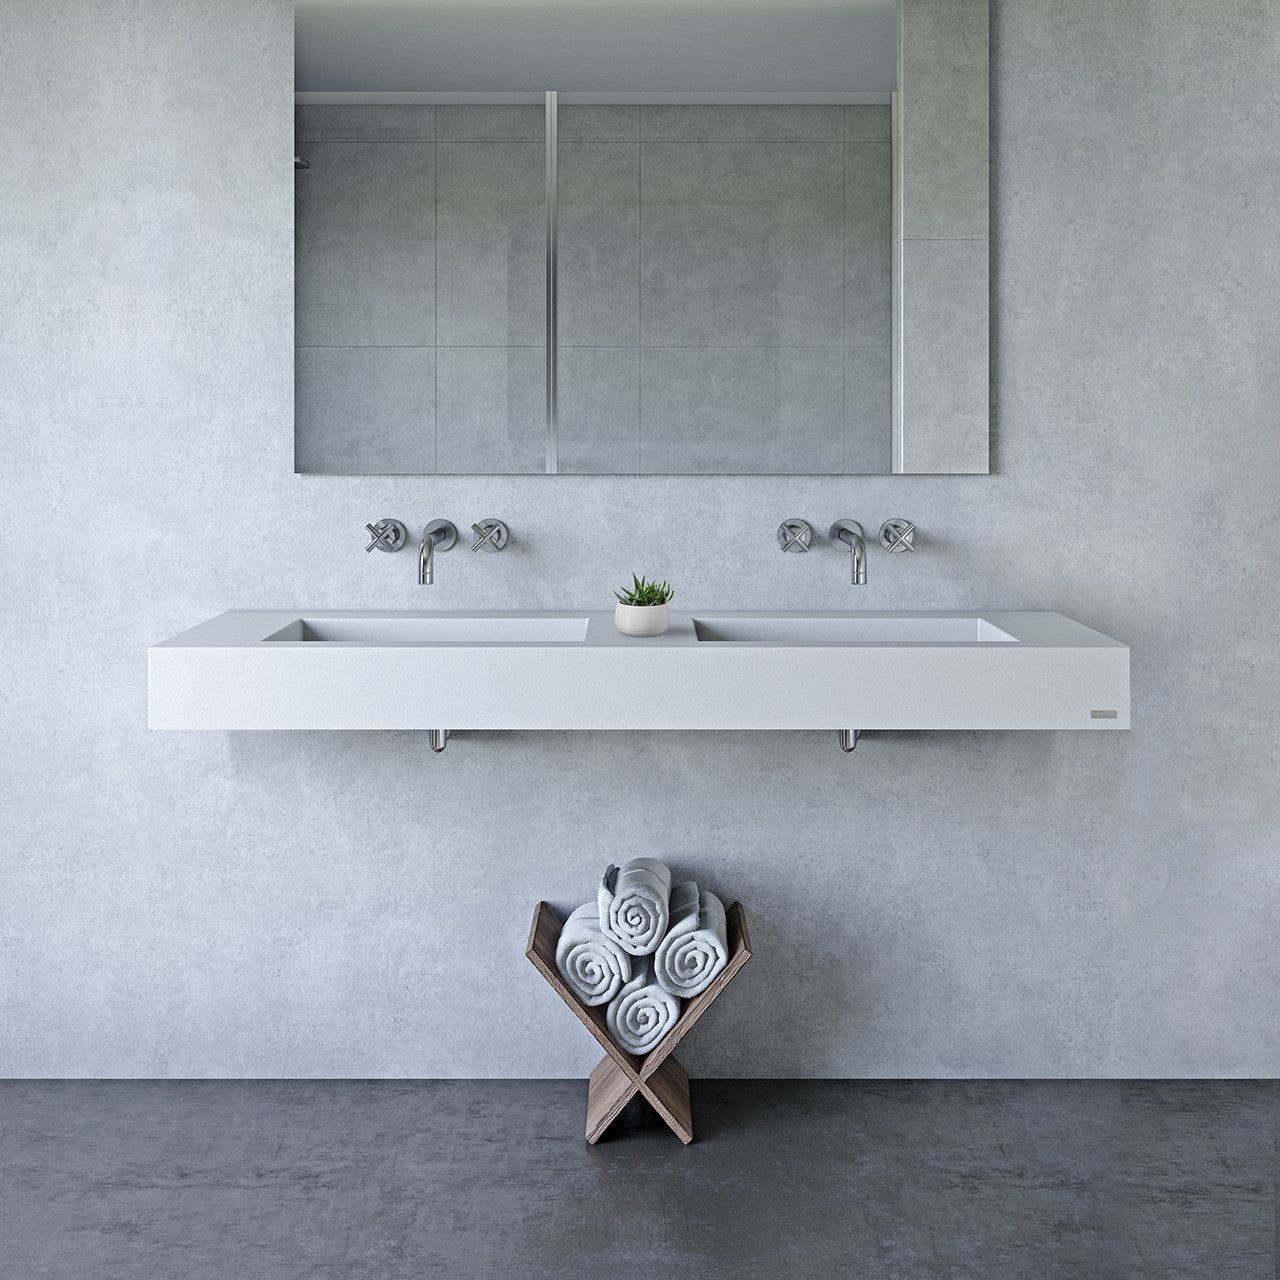 Light gray concrete wall hung sink against a variegated gray wall.